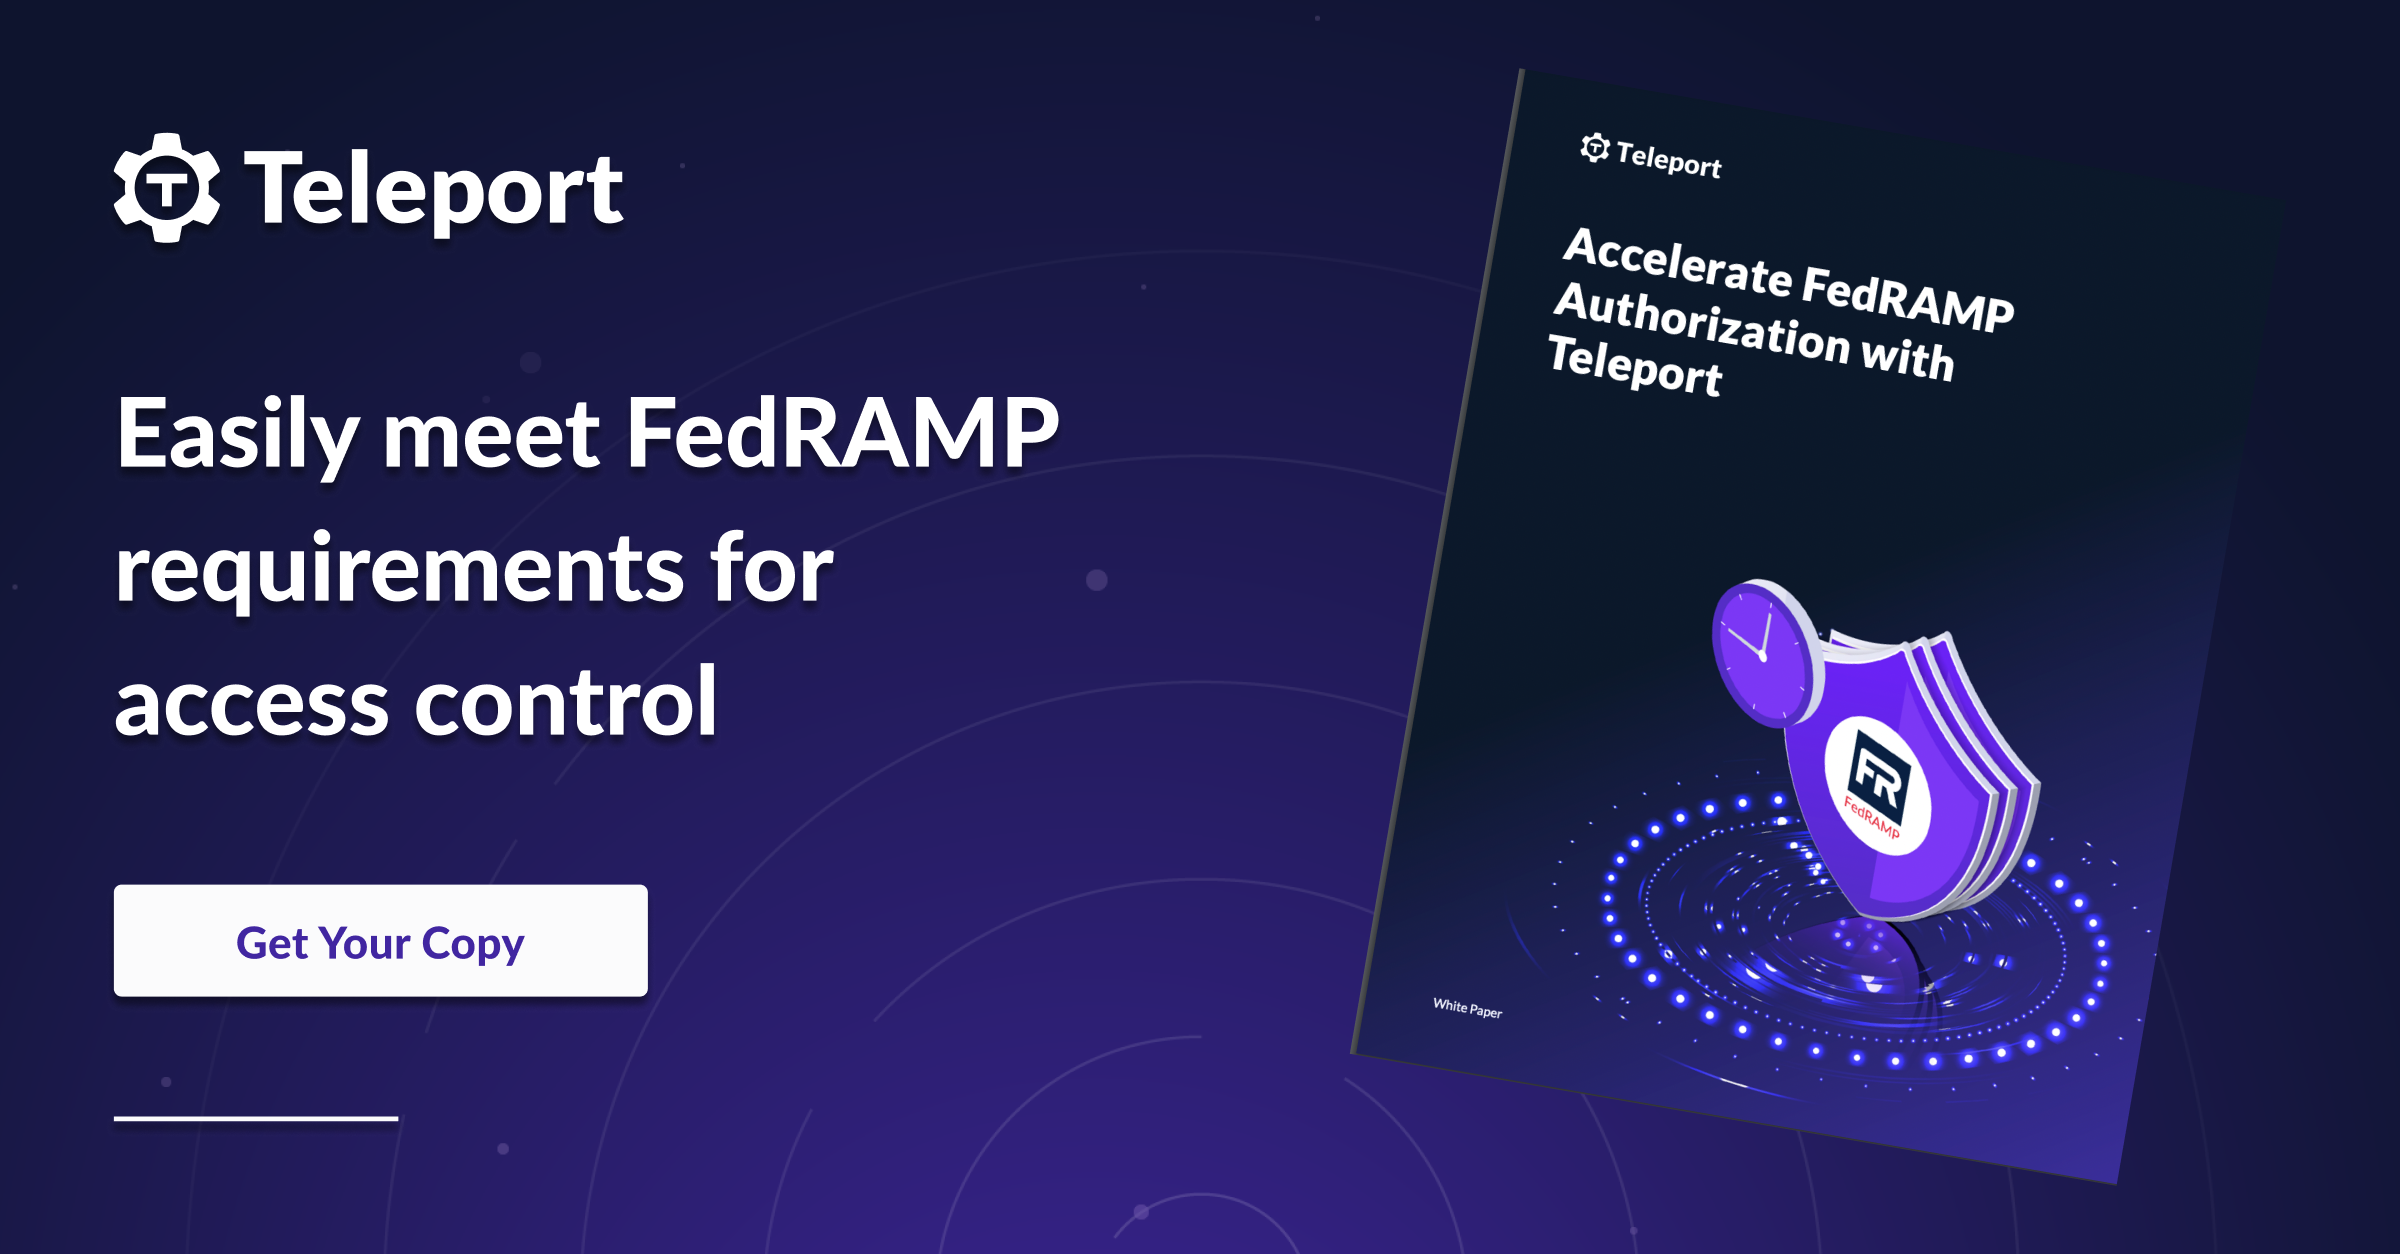 Accelerate FedRAMP Authorization with Teleport